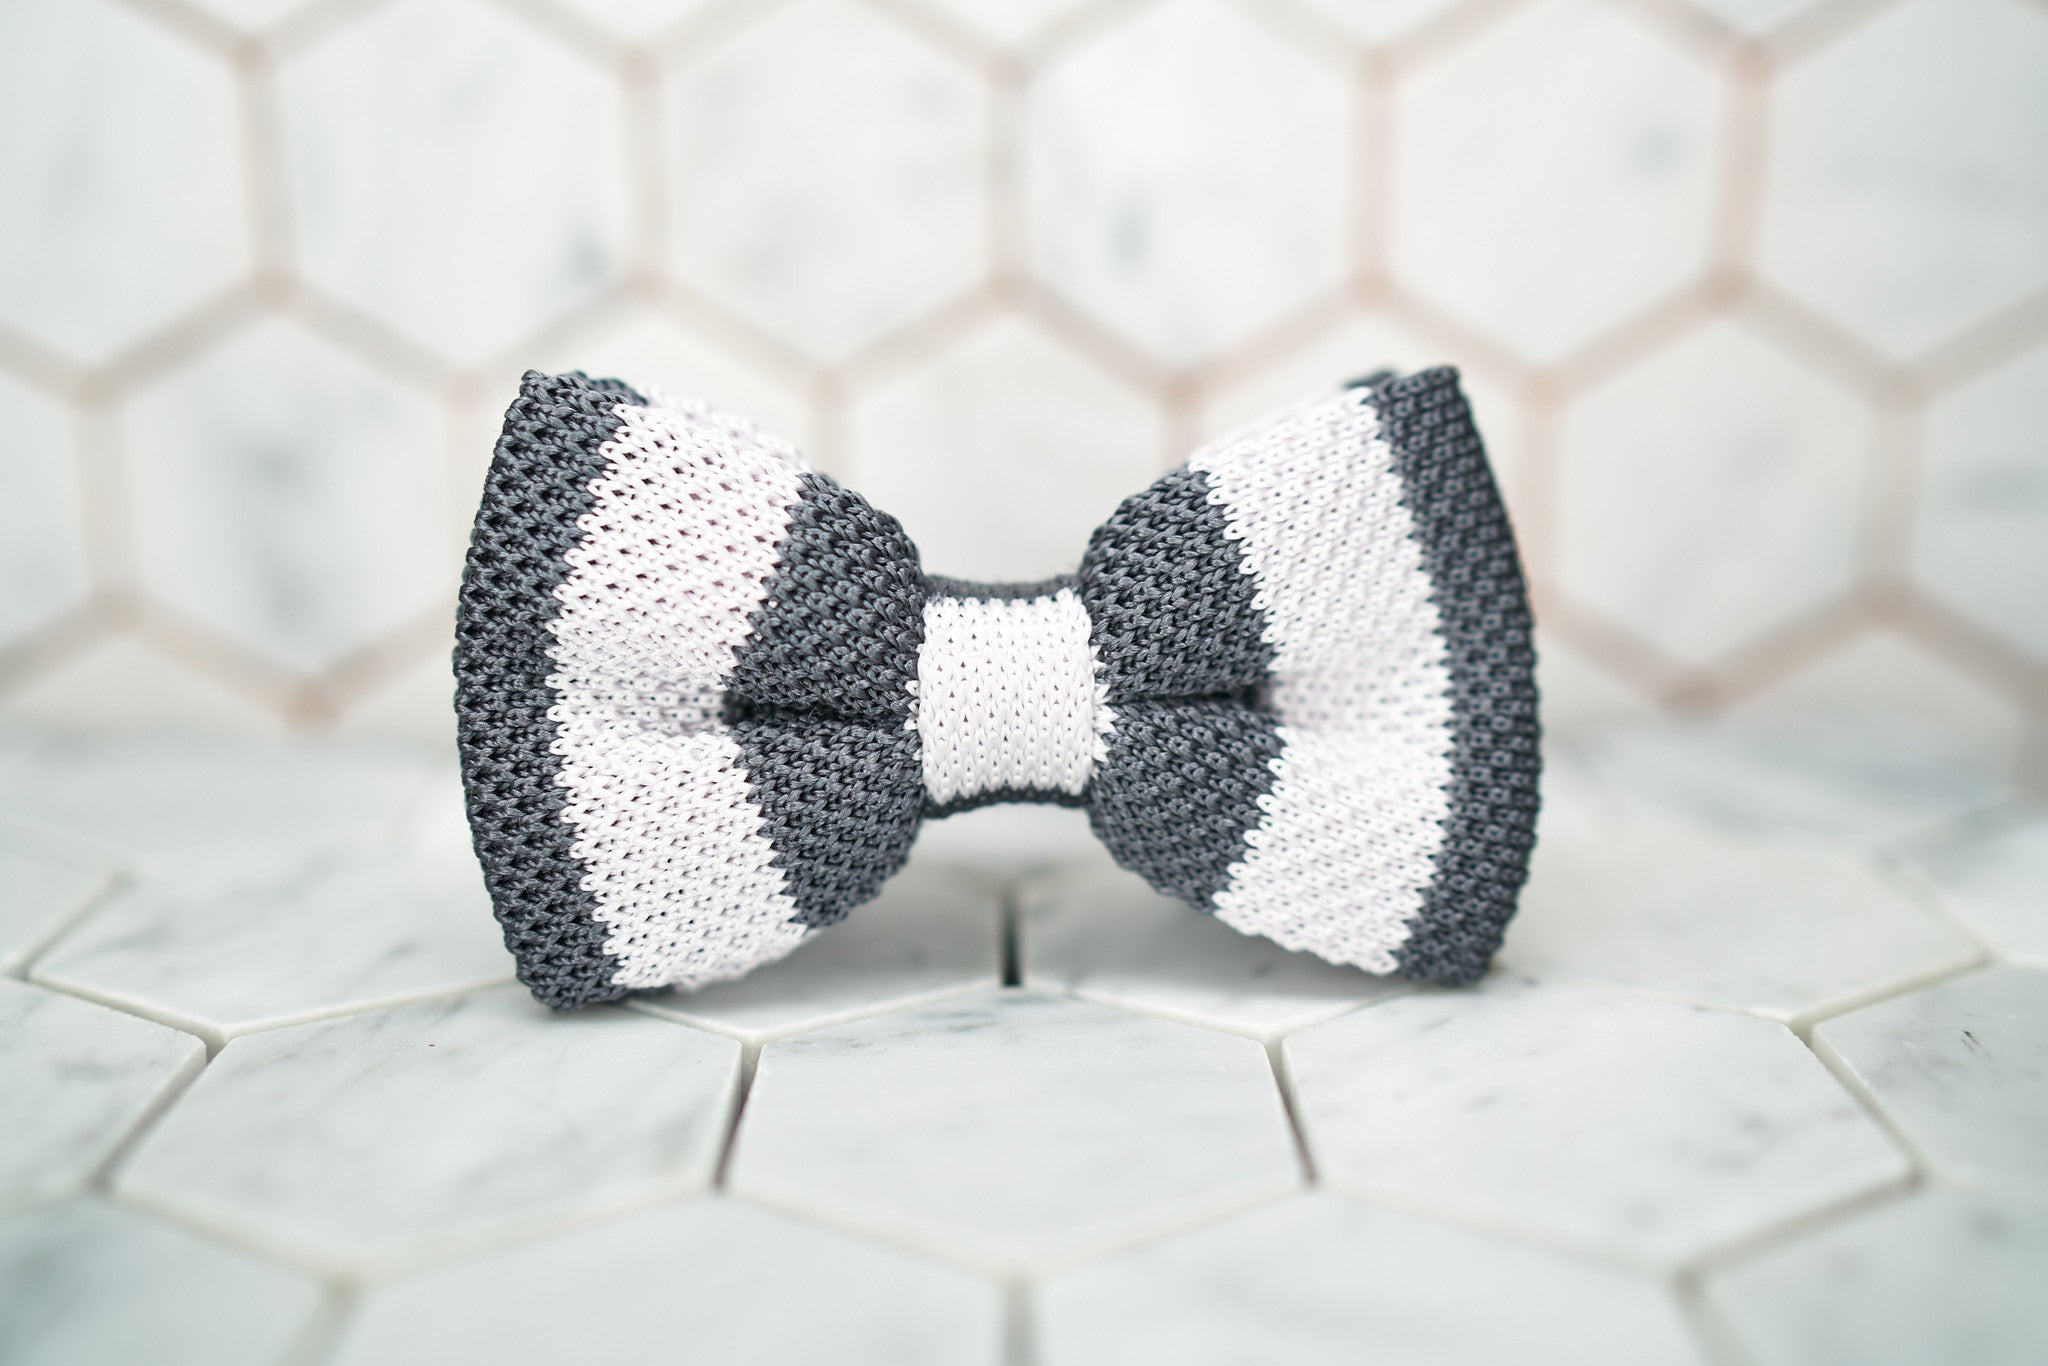 A front image of the silk knitted Dear Martian bow tie, which feature grey and white stripes.